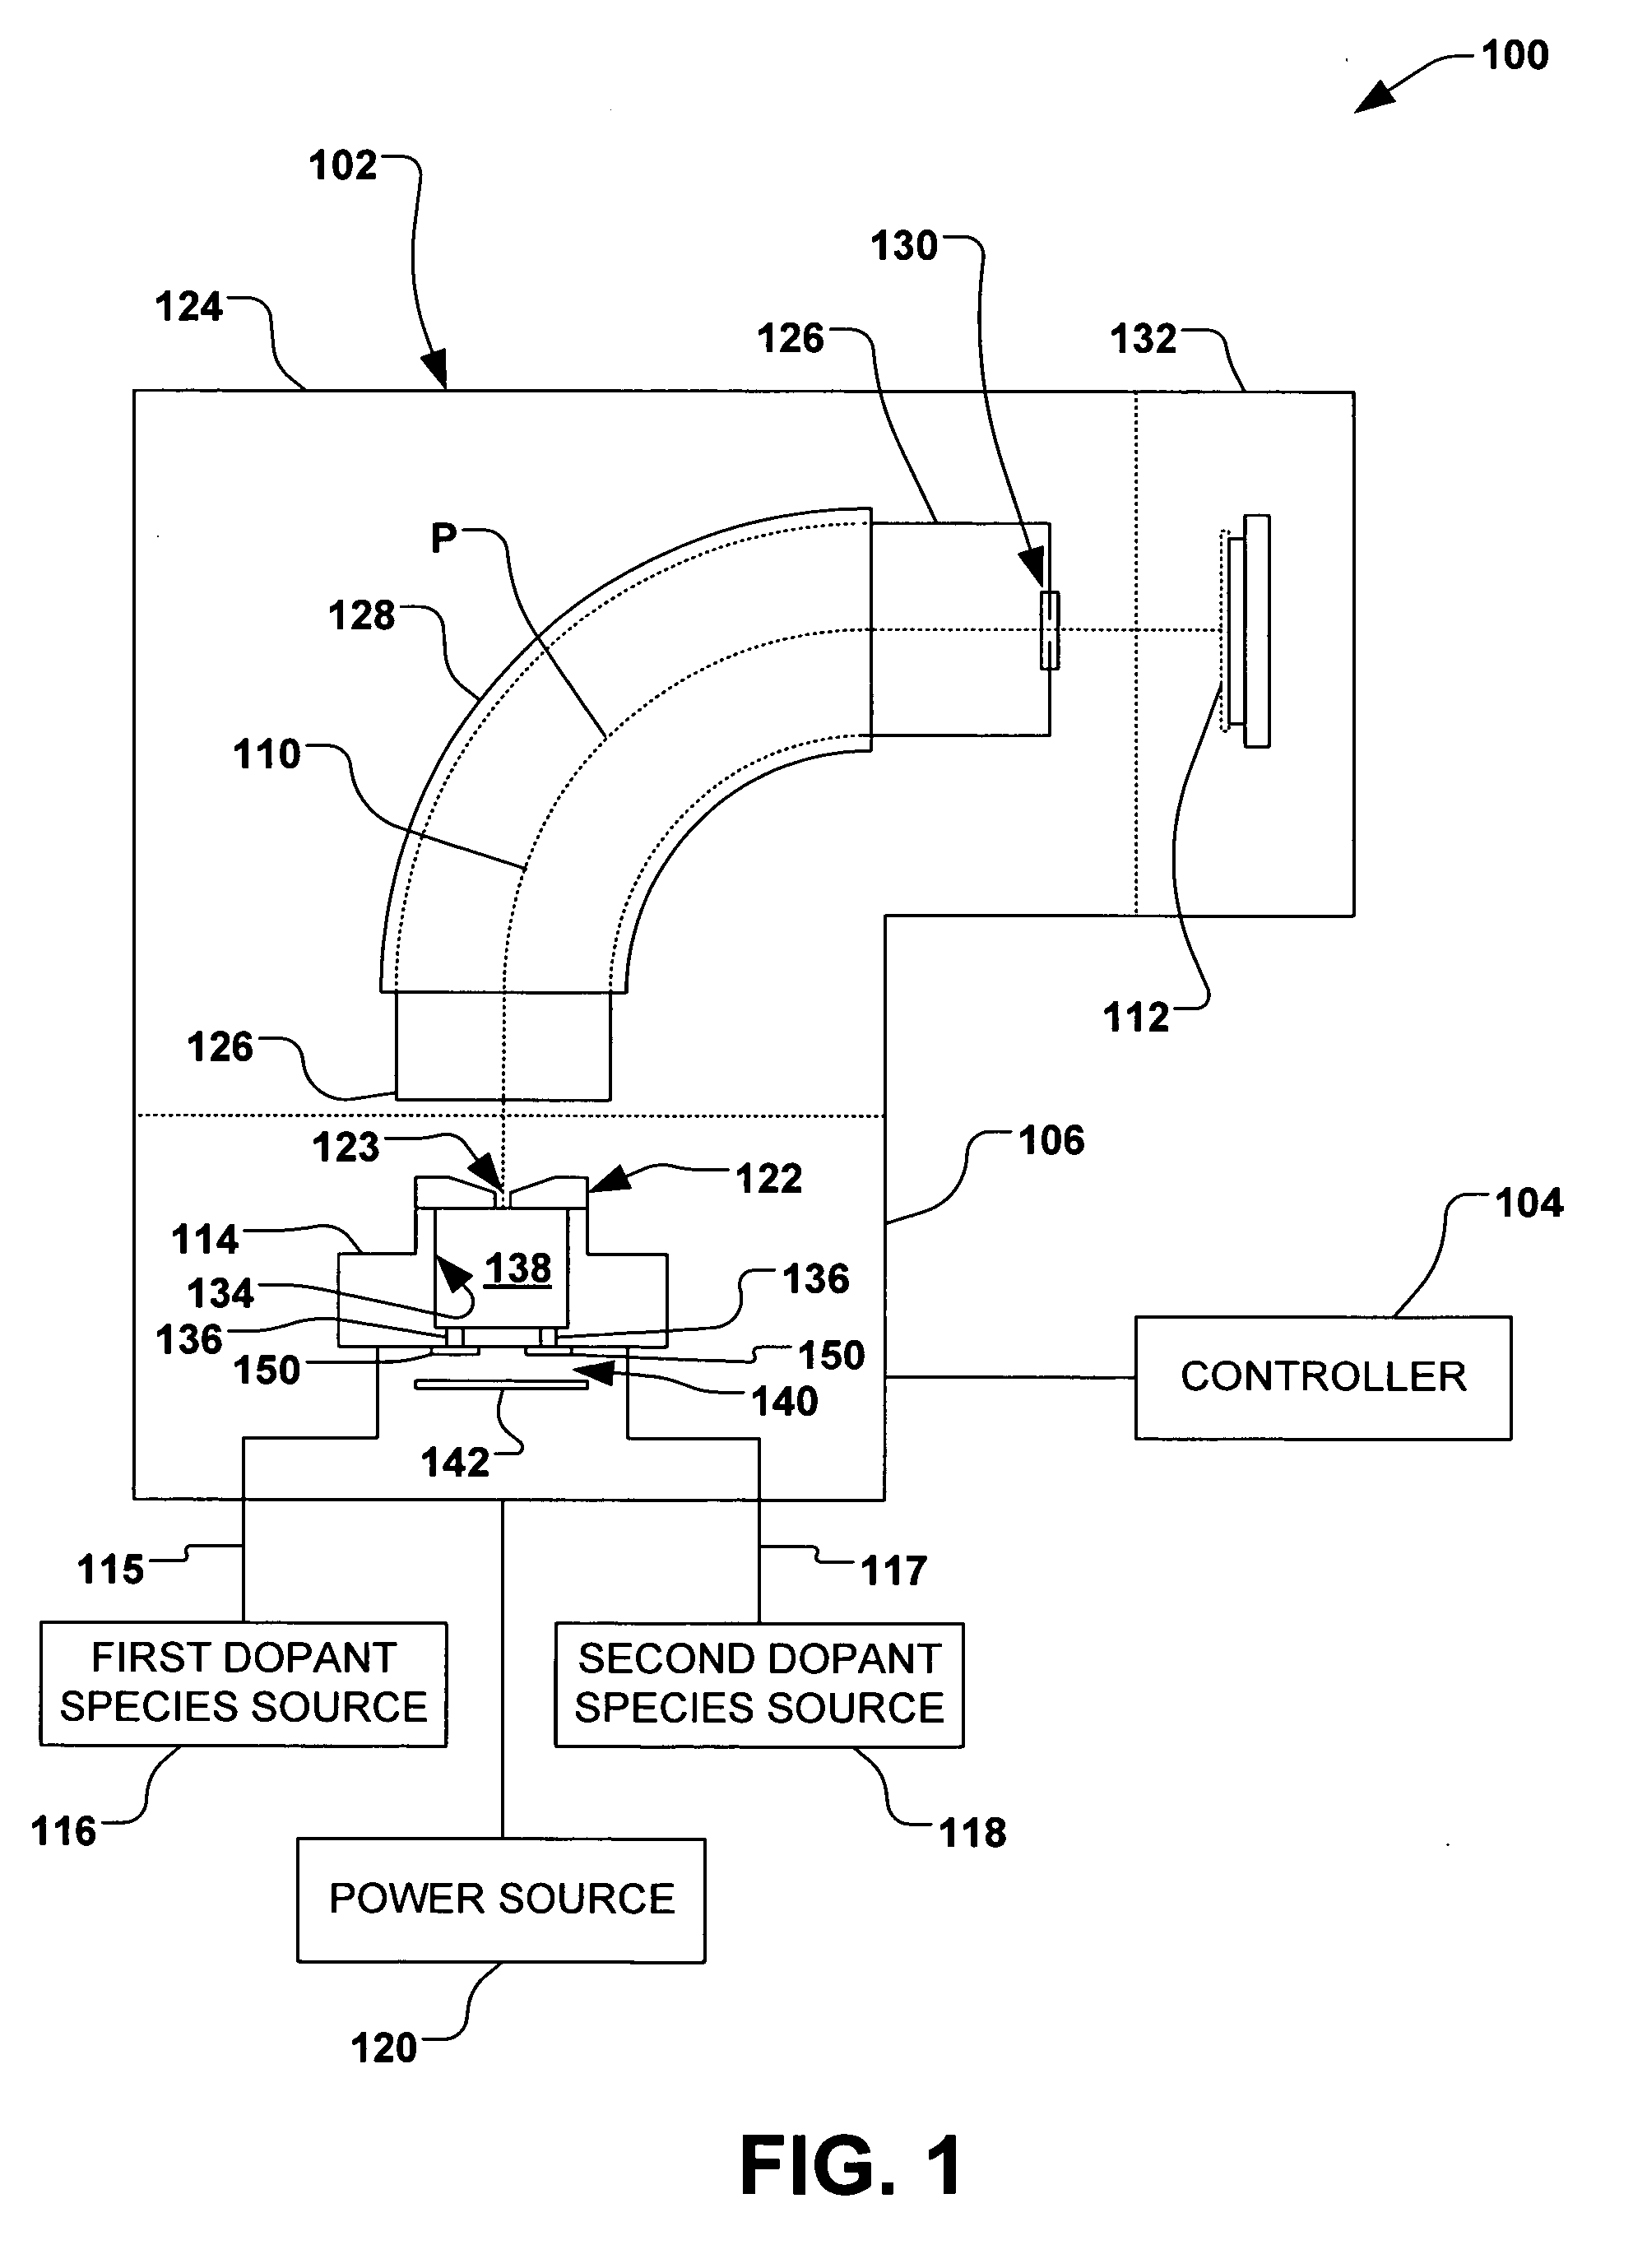 High conductance ion source